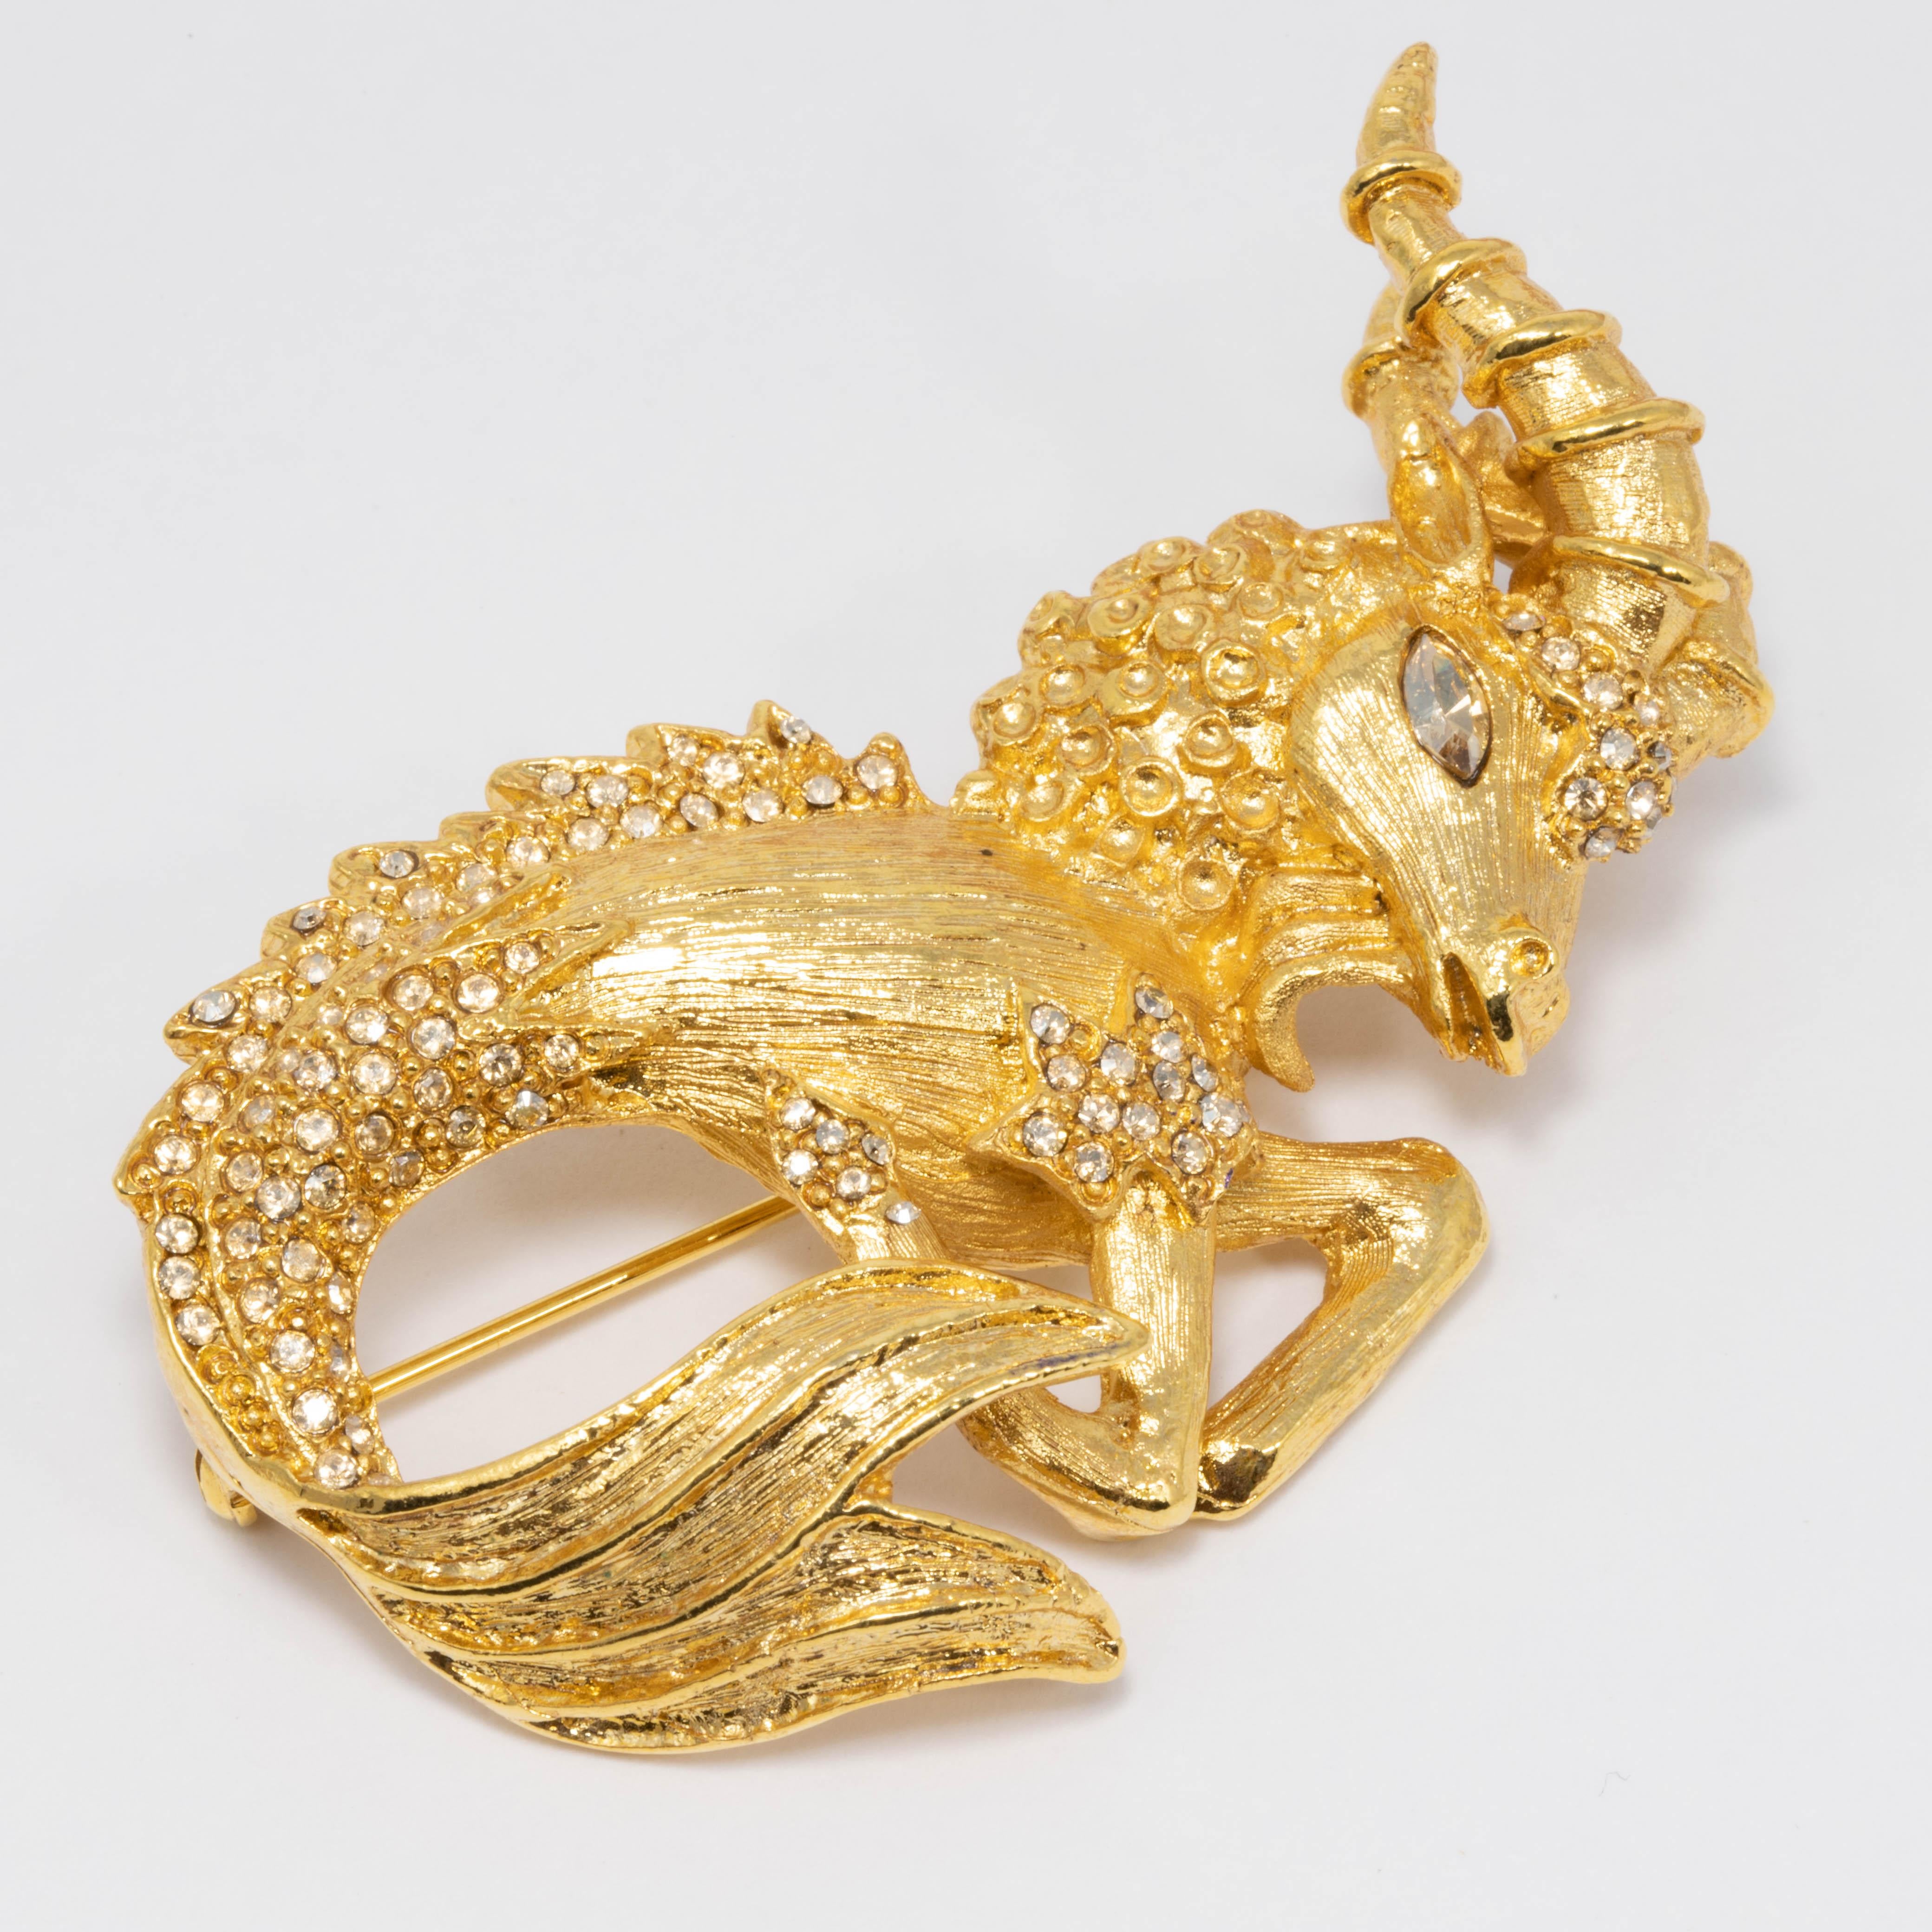 Oscar de la Renta brooch featuring a mystical ram creature based on designs from Elizabethan tapestries. Lend the mythical look to any ensemble with this gold-plated ram brooch set with gold shadow Swarovski crystals.

Tags, Marks, Hallmarks: Oscar